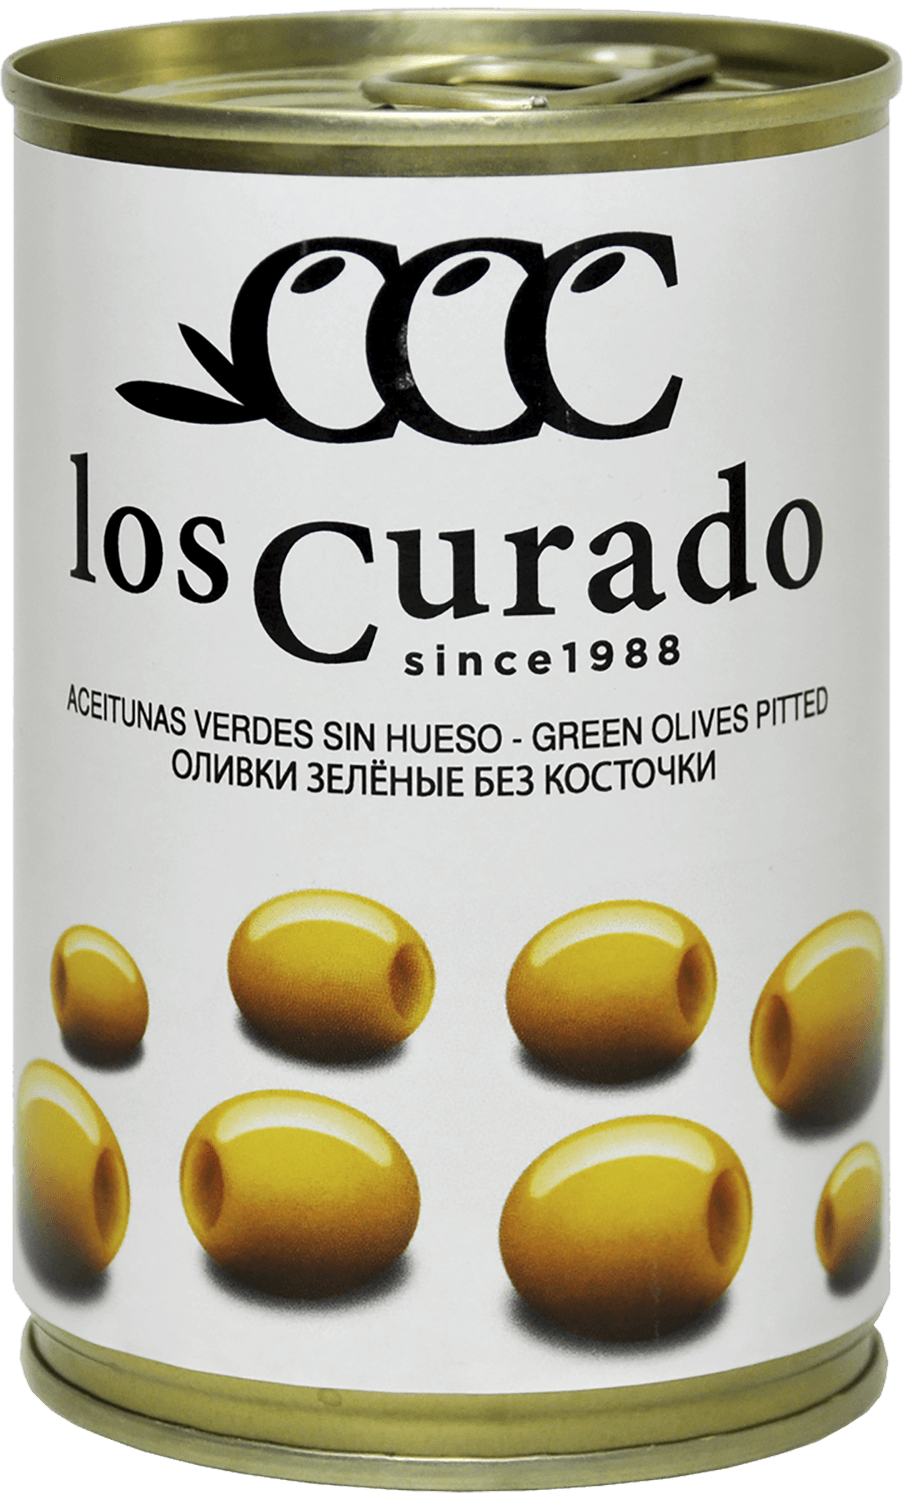 Green olives pitted Los Curado